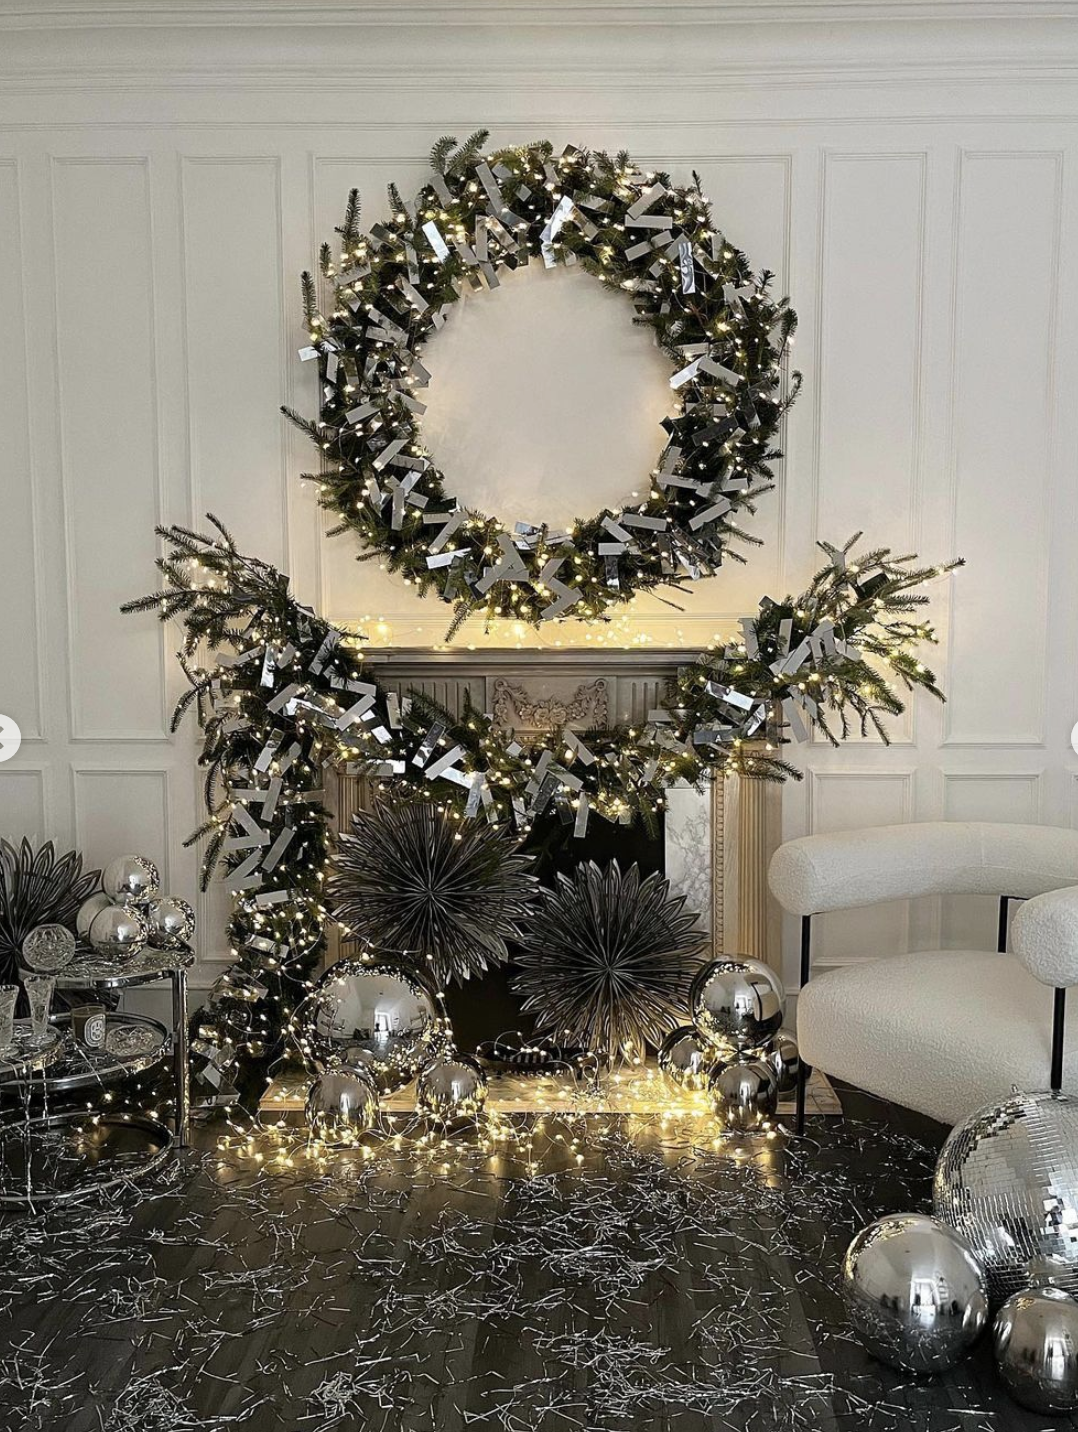 Disco Christmas mantel with mirrored garland on wreath and disco balls on hearth / kellyelko.com